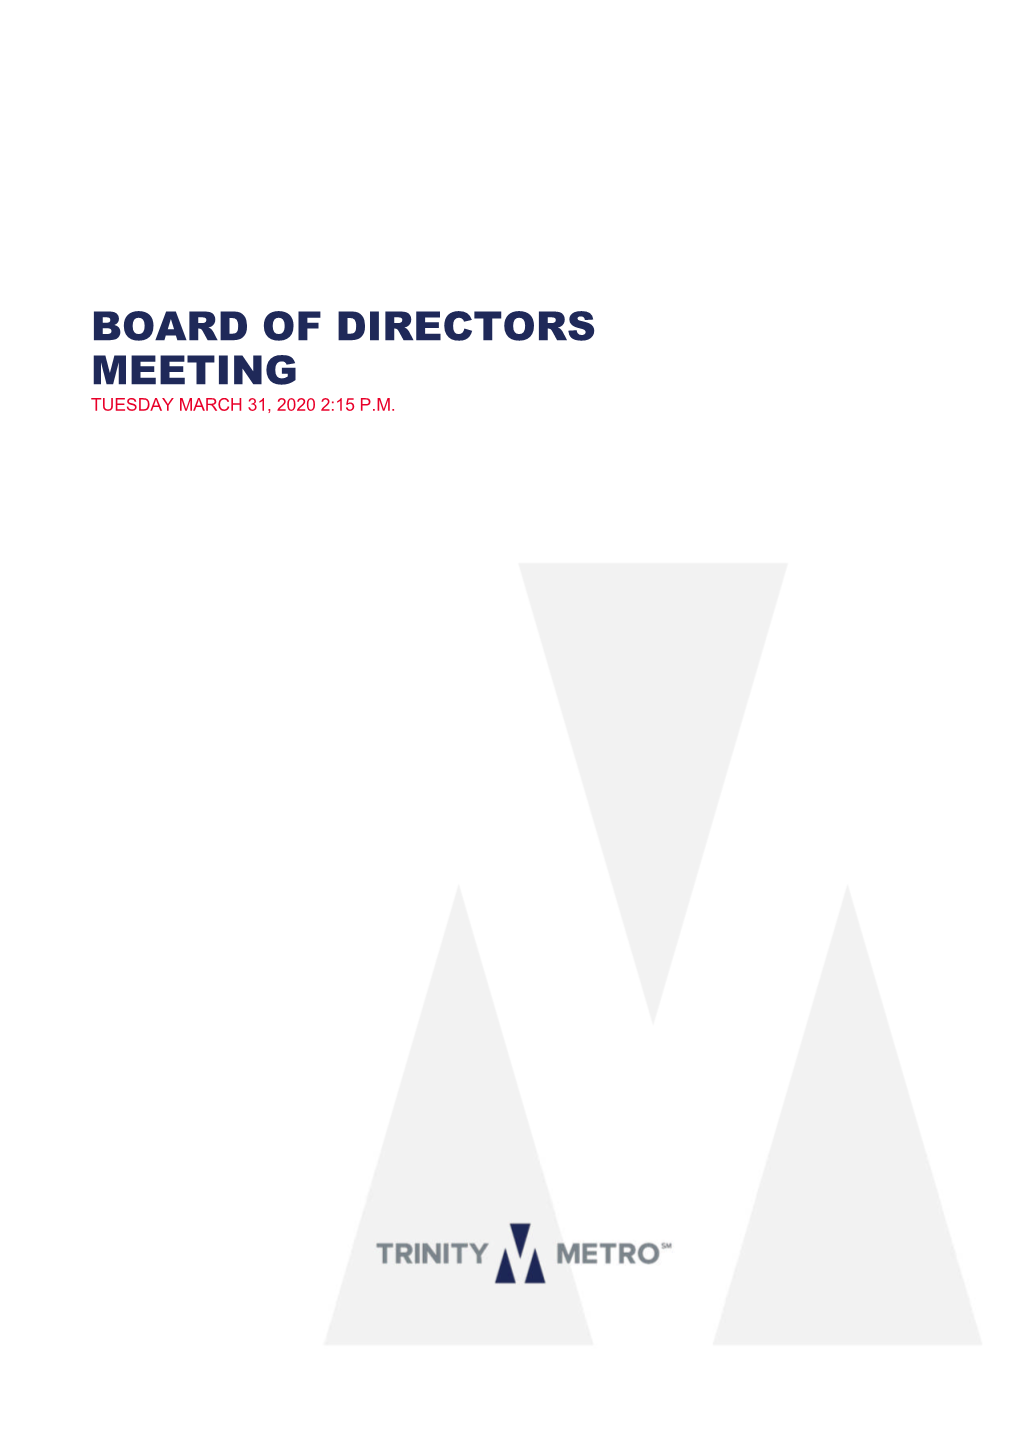 Board of Directors Meeting Tuesday March 31, 2020 2:15 P.M